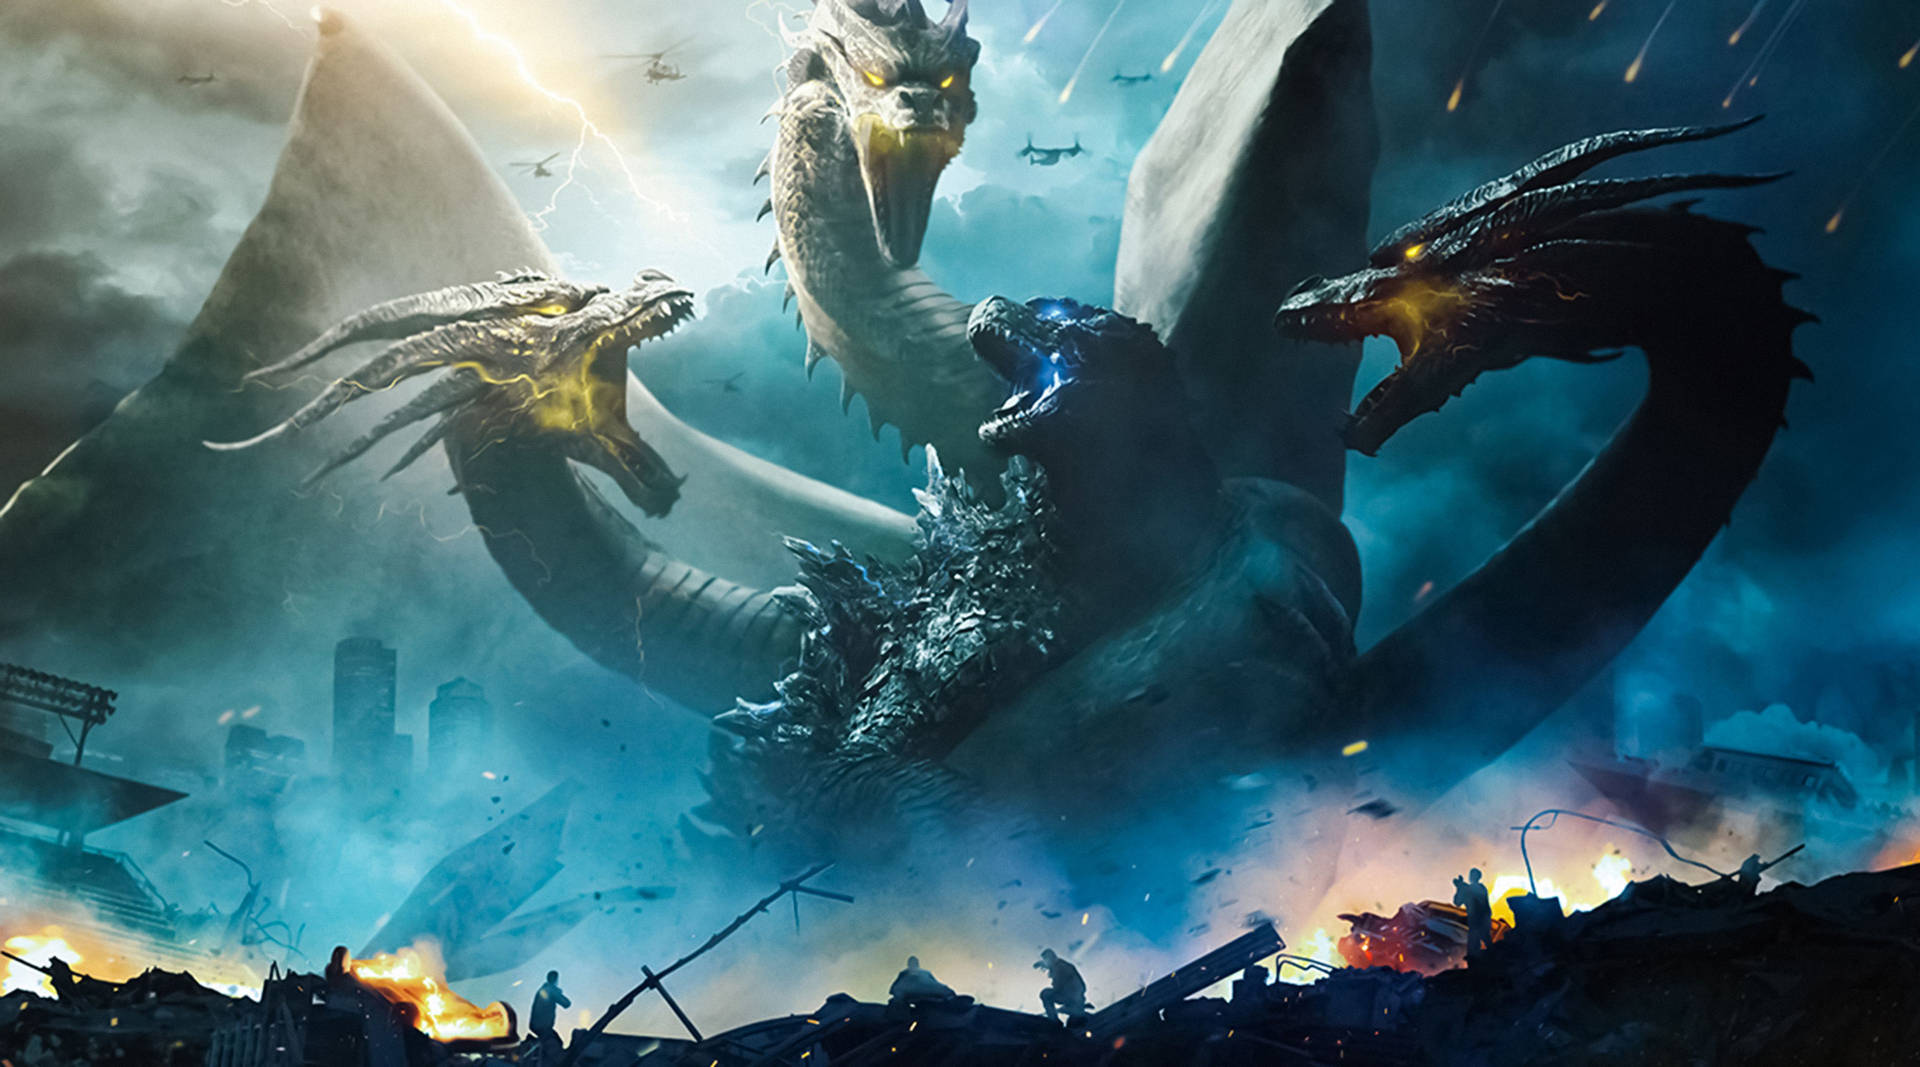 "Godzilla and King Ghidorah engaged in an epic battle amongst the frigid Arctic tundra". Wallpaper